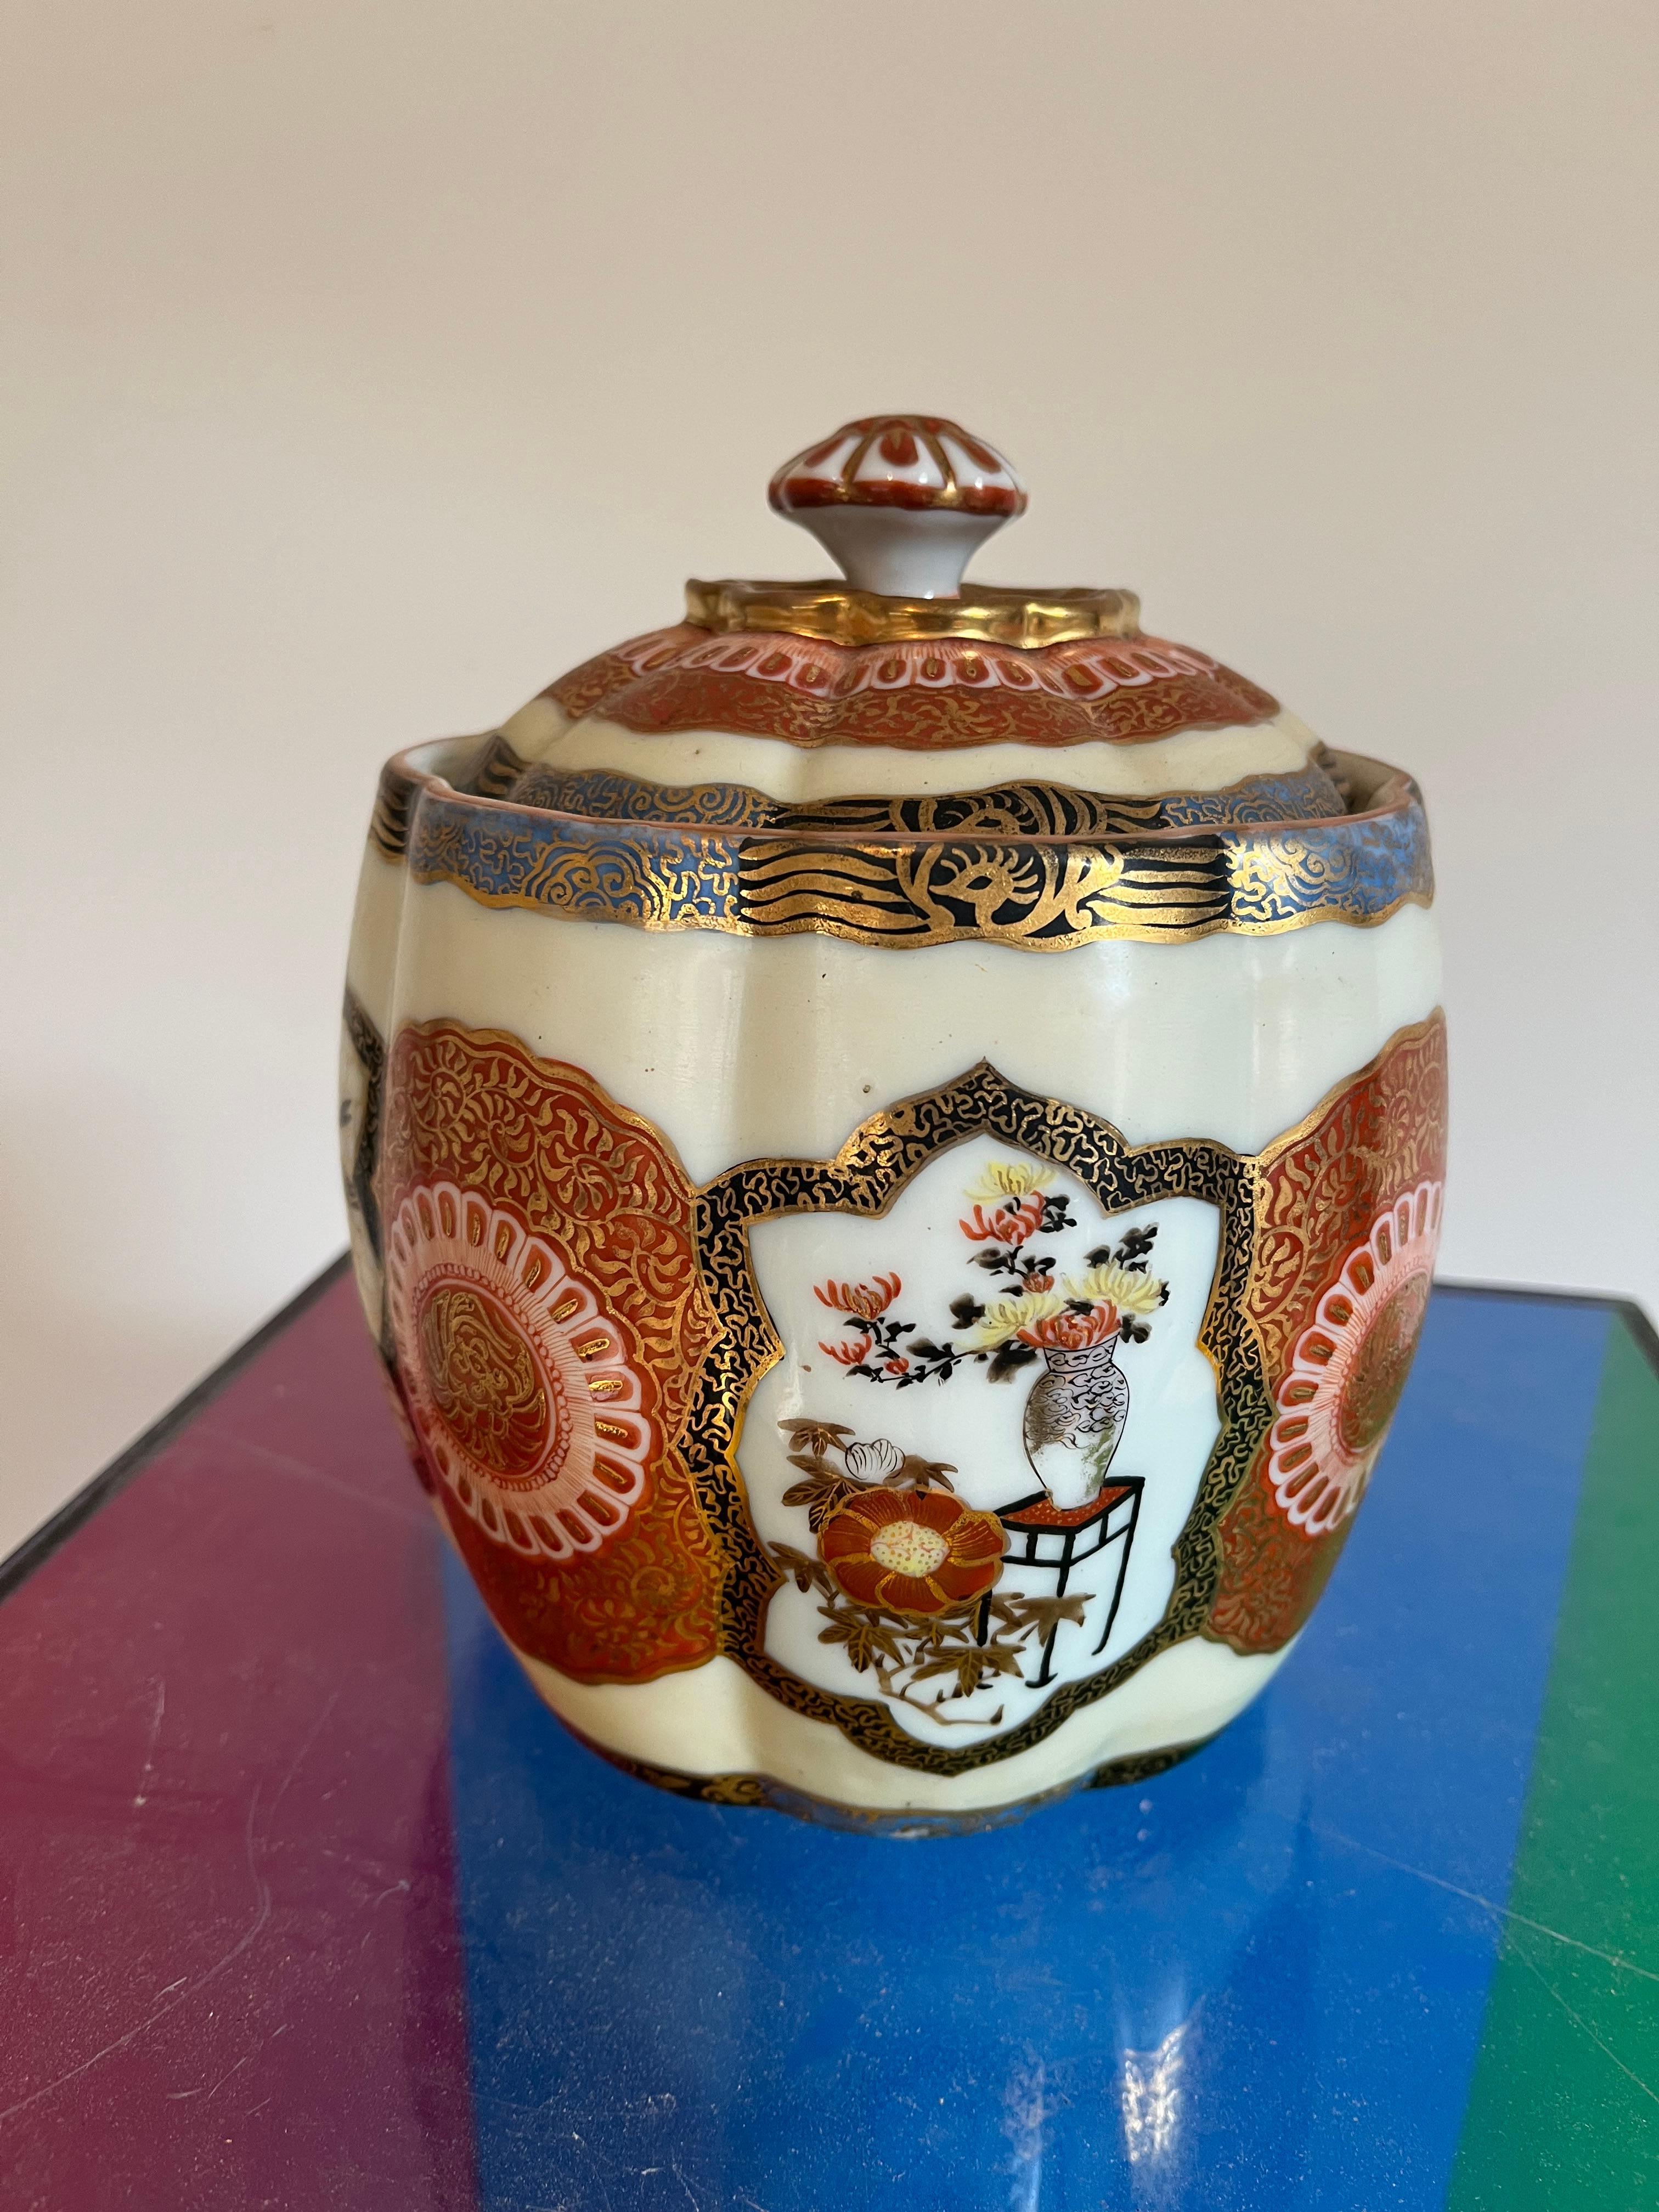 A charming Japanese porcelain tobacco jar with lid in the Imari style, alternating panels showing still-life scenes and floral designs. Meiji period. The base shows the maker’s character marks in red. 